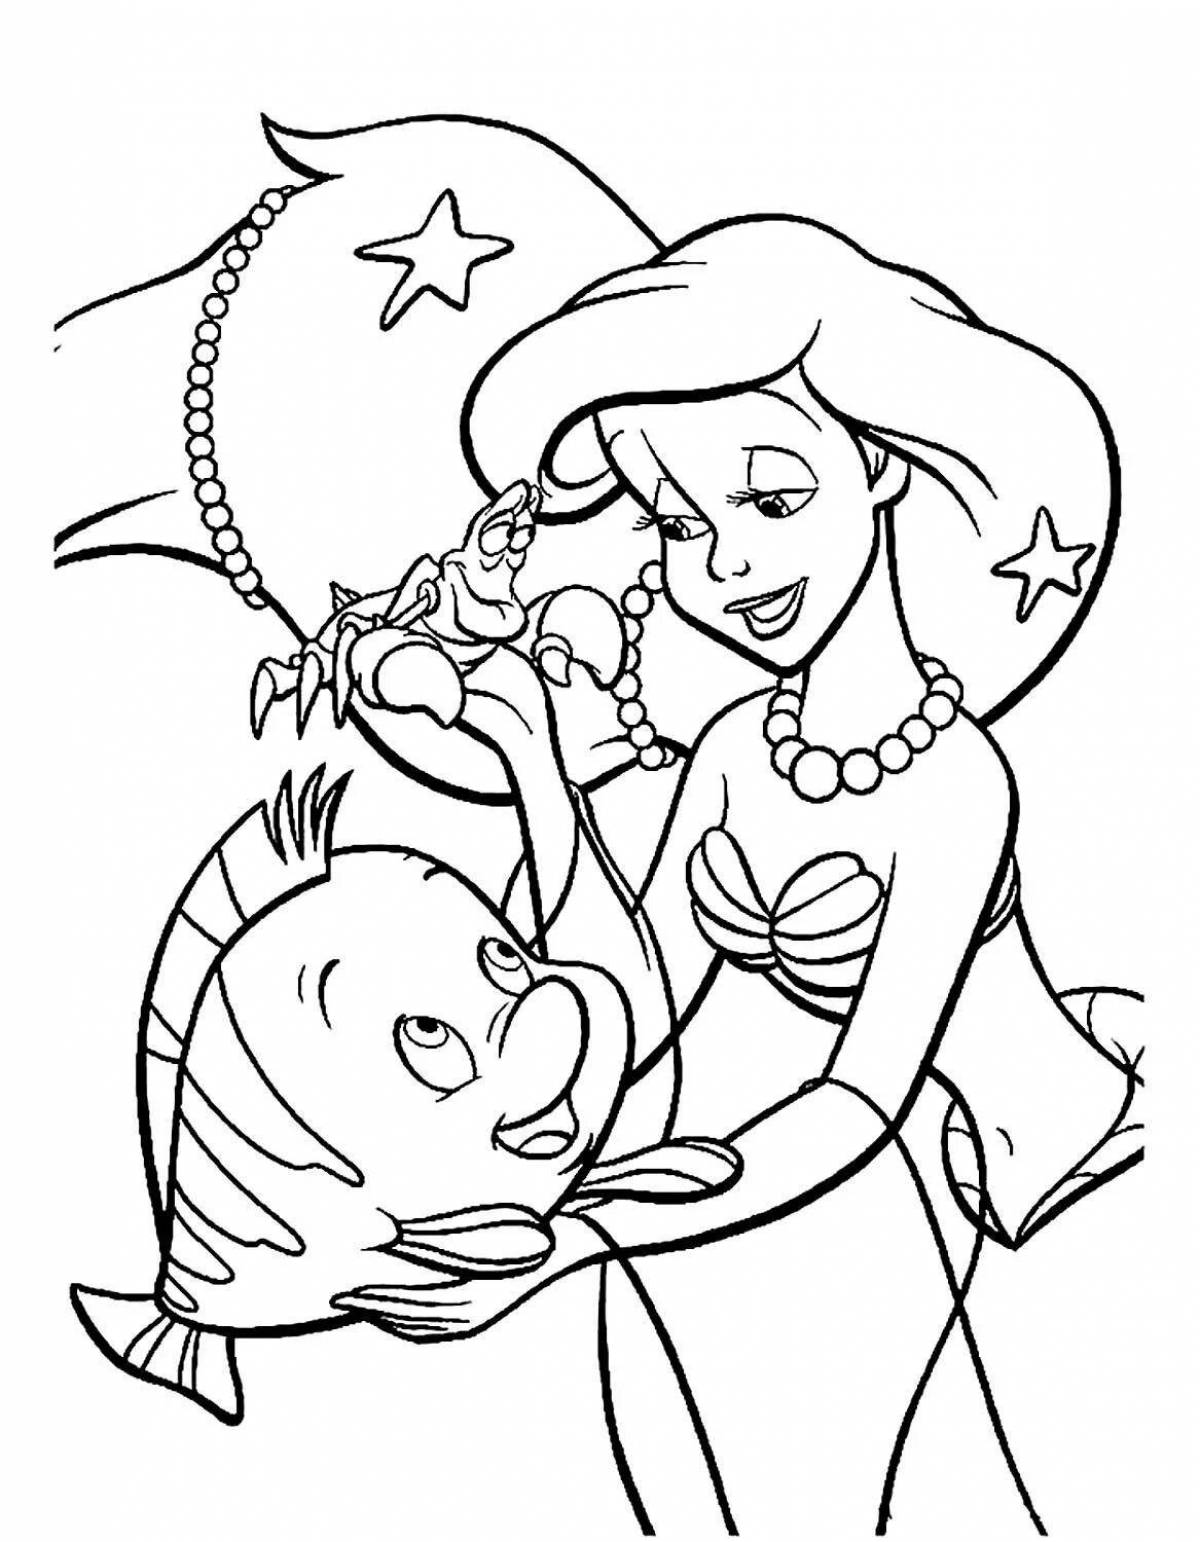 Delightful ariel the little mermaid coloring book for girls